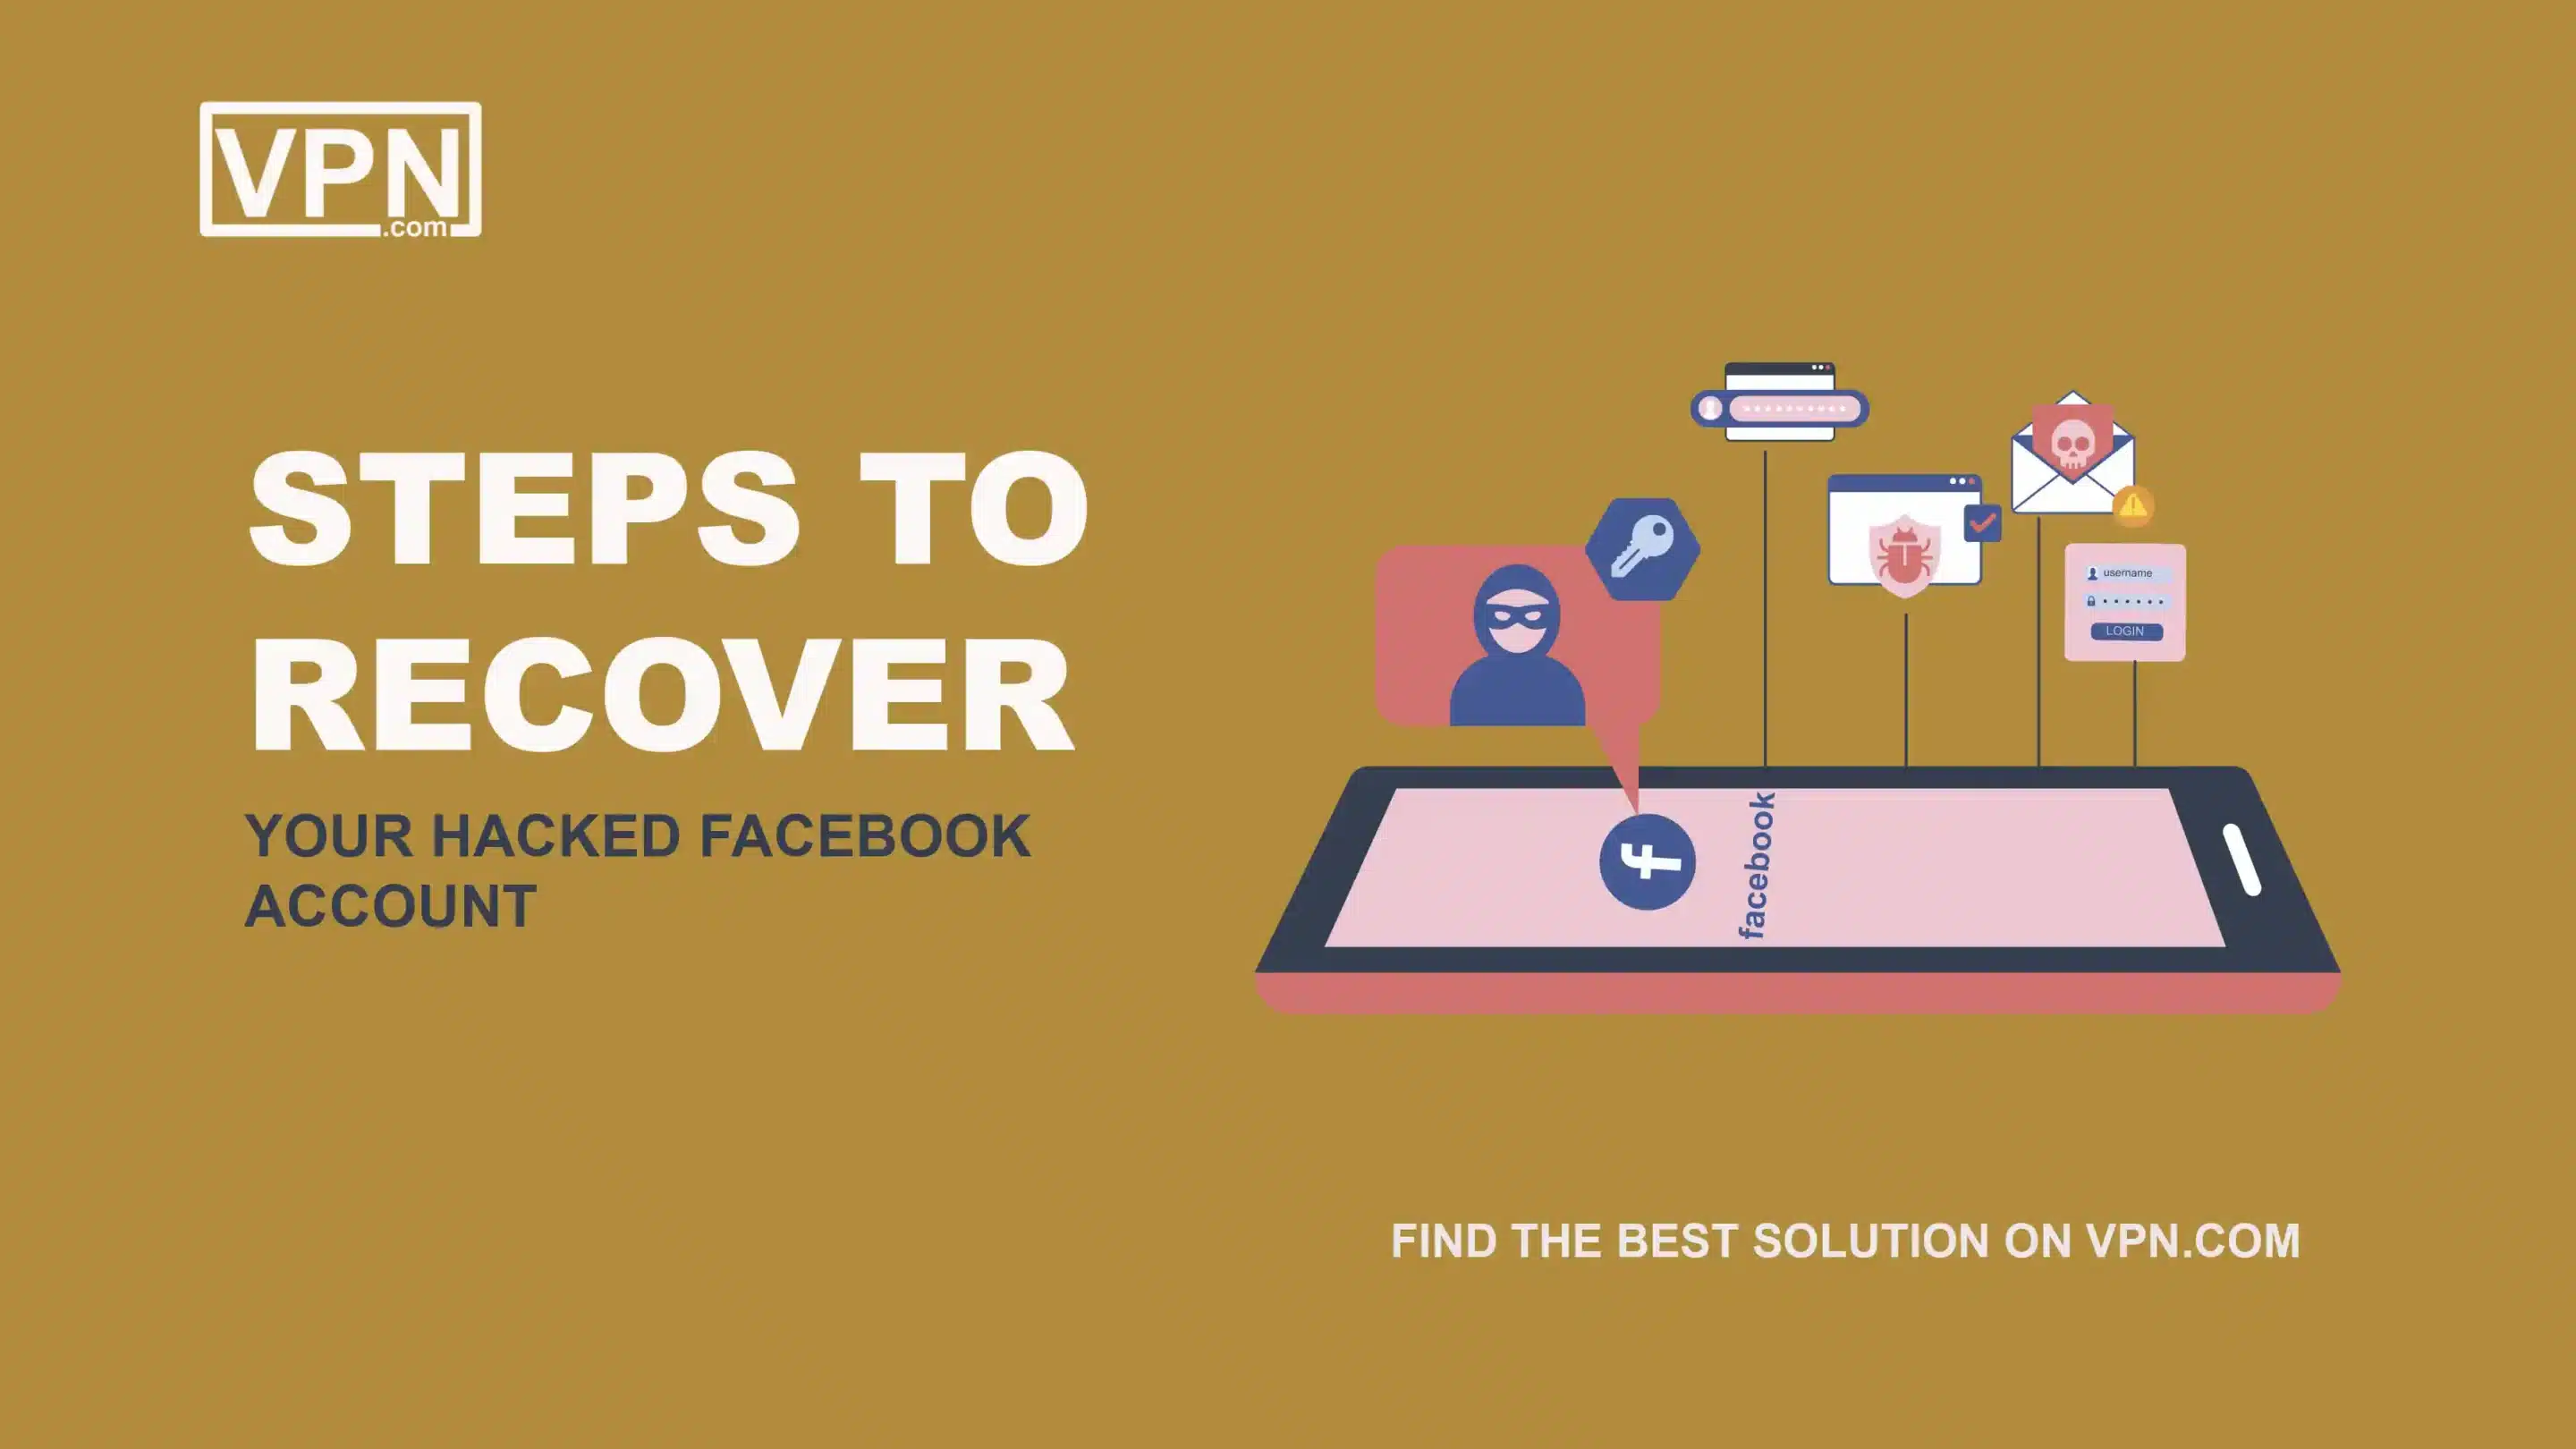 Steps to Recover Your Hacked Facebook Account